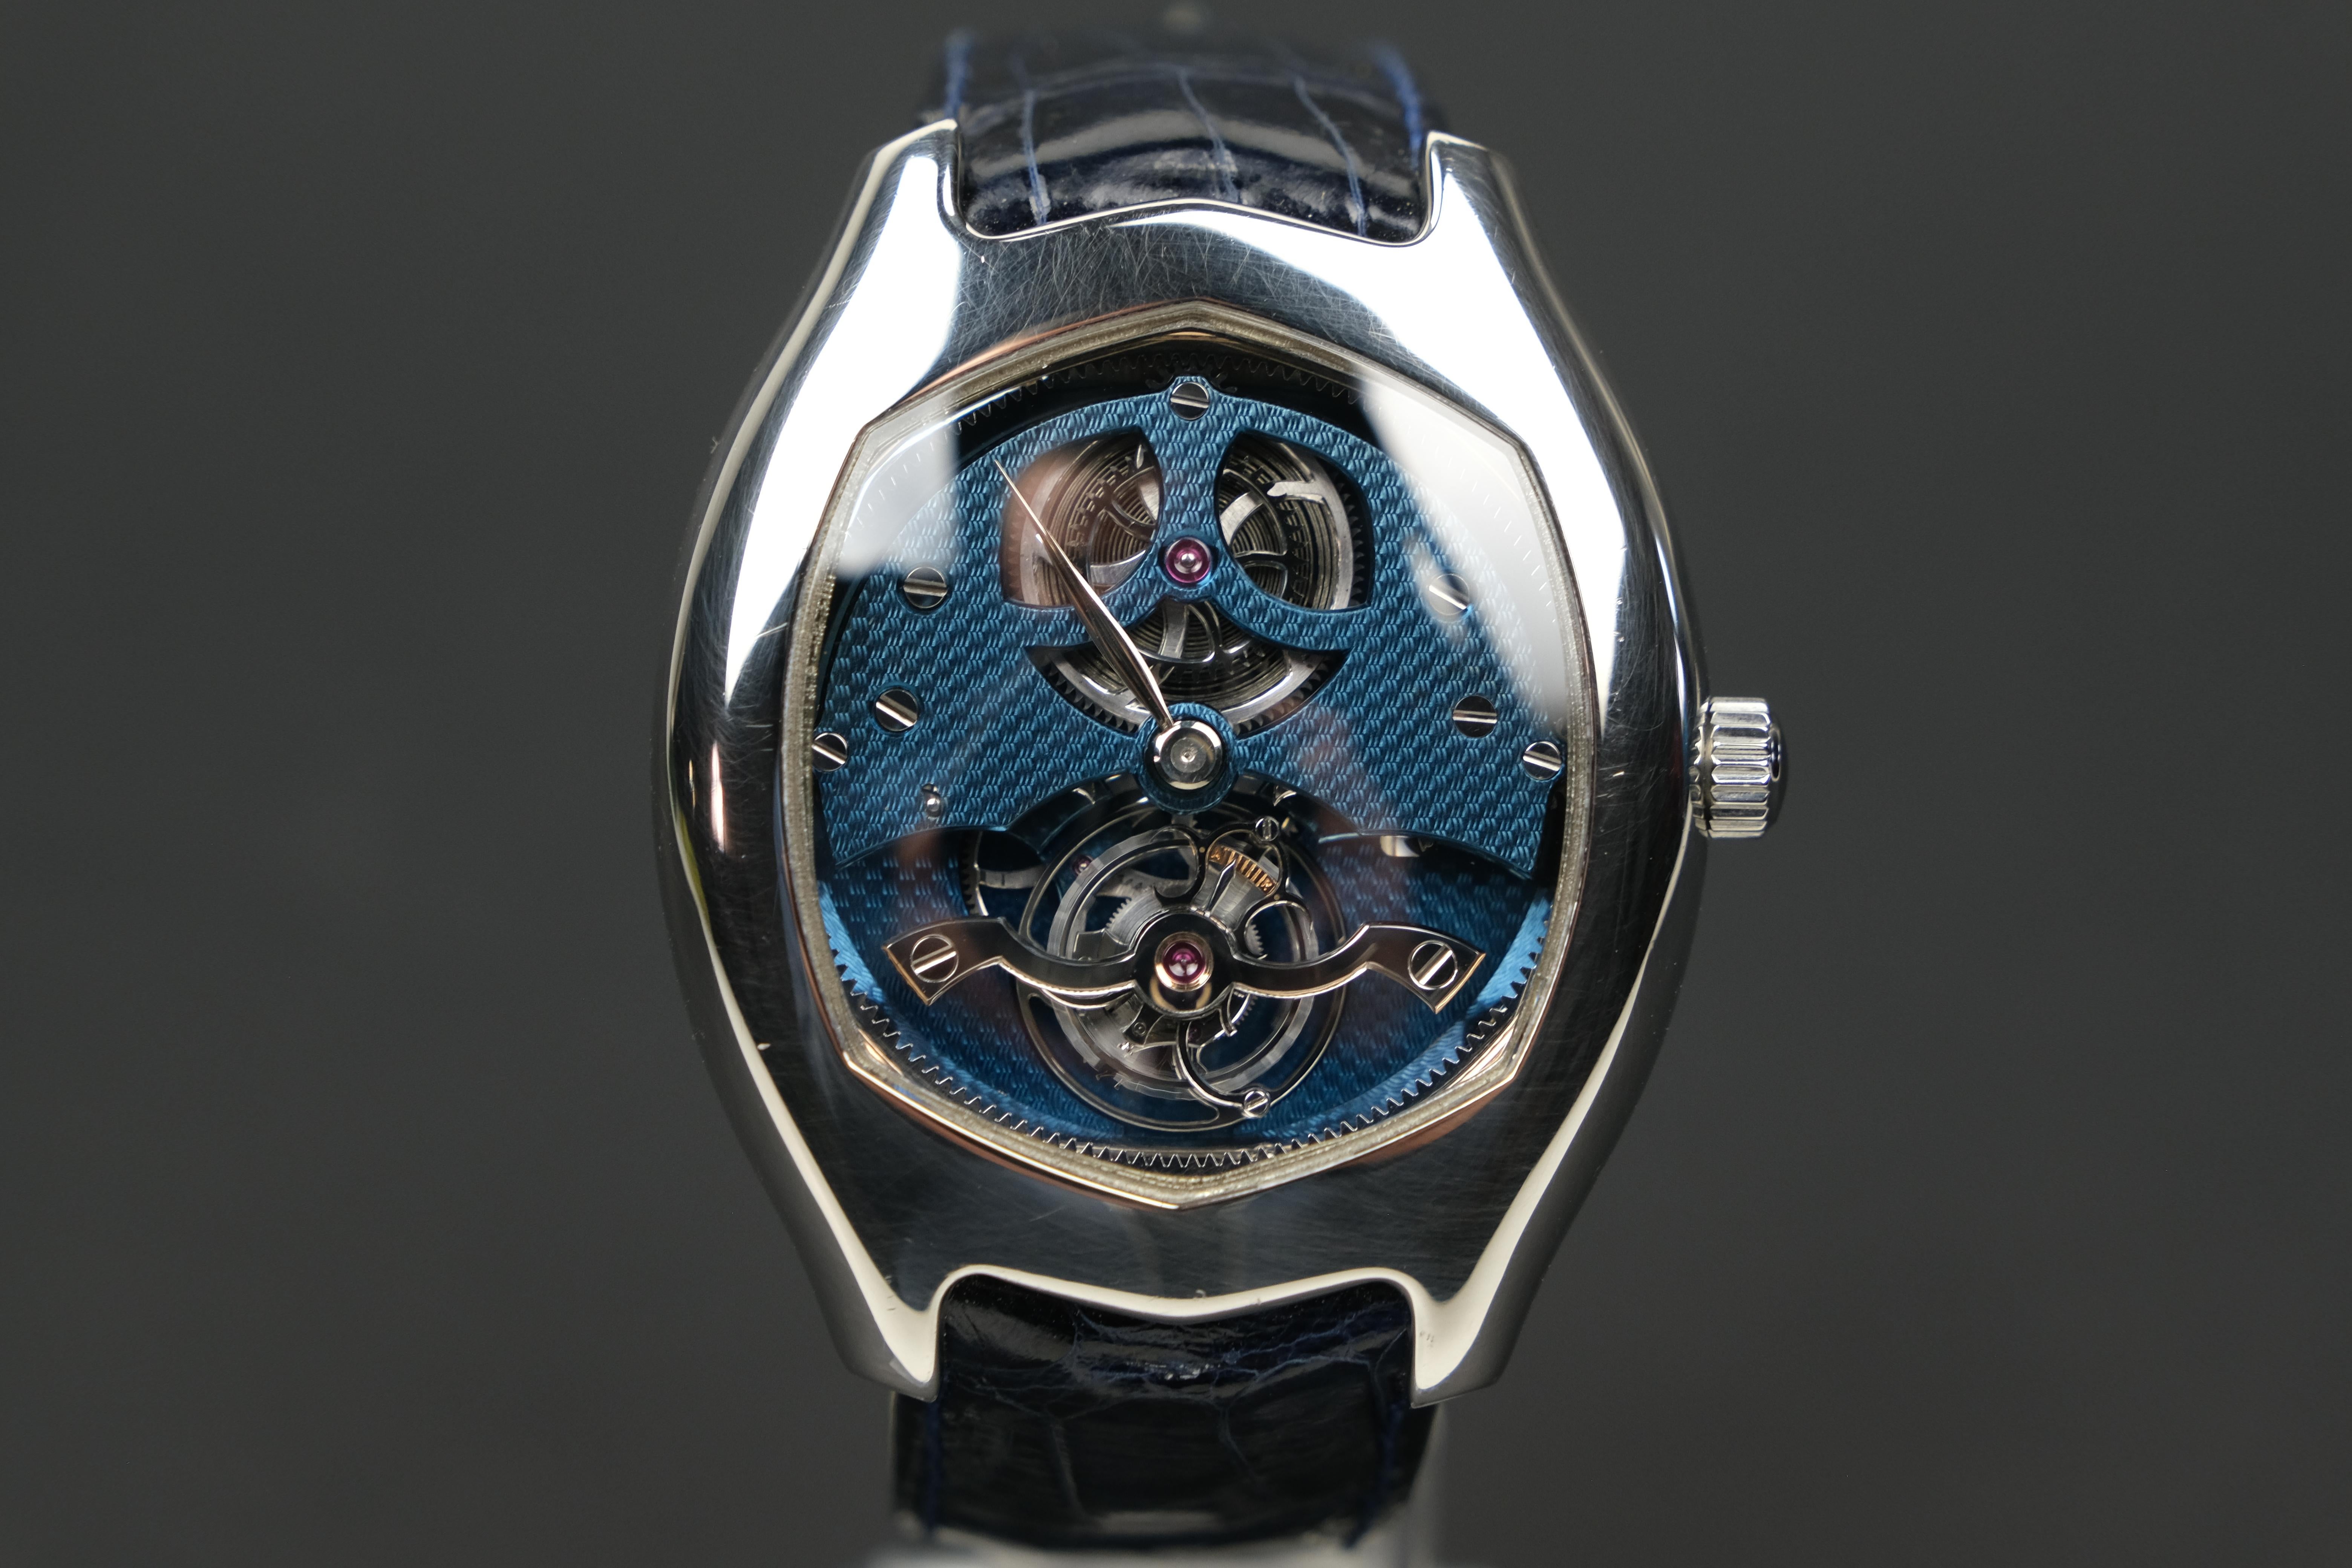 A cedric Johner Abyss Tourbillon wristwatch. A very rare platinum tourbillon that is made completely by hand by an independant Haute horology watchmaker in Geneva Switzerland. Cedric Johner makes and finishes the case and all movement parts by hand